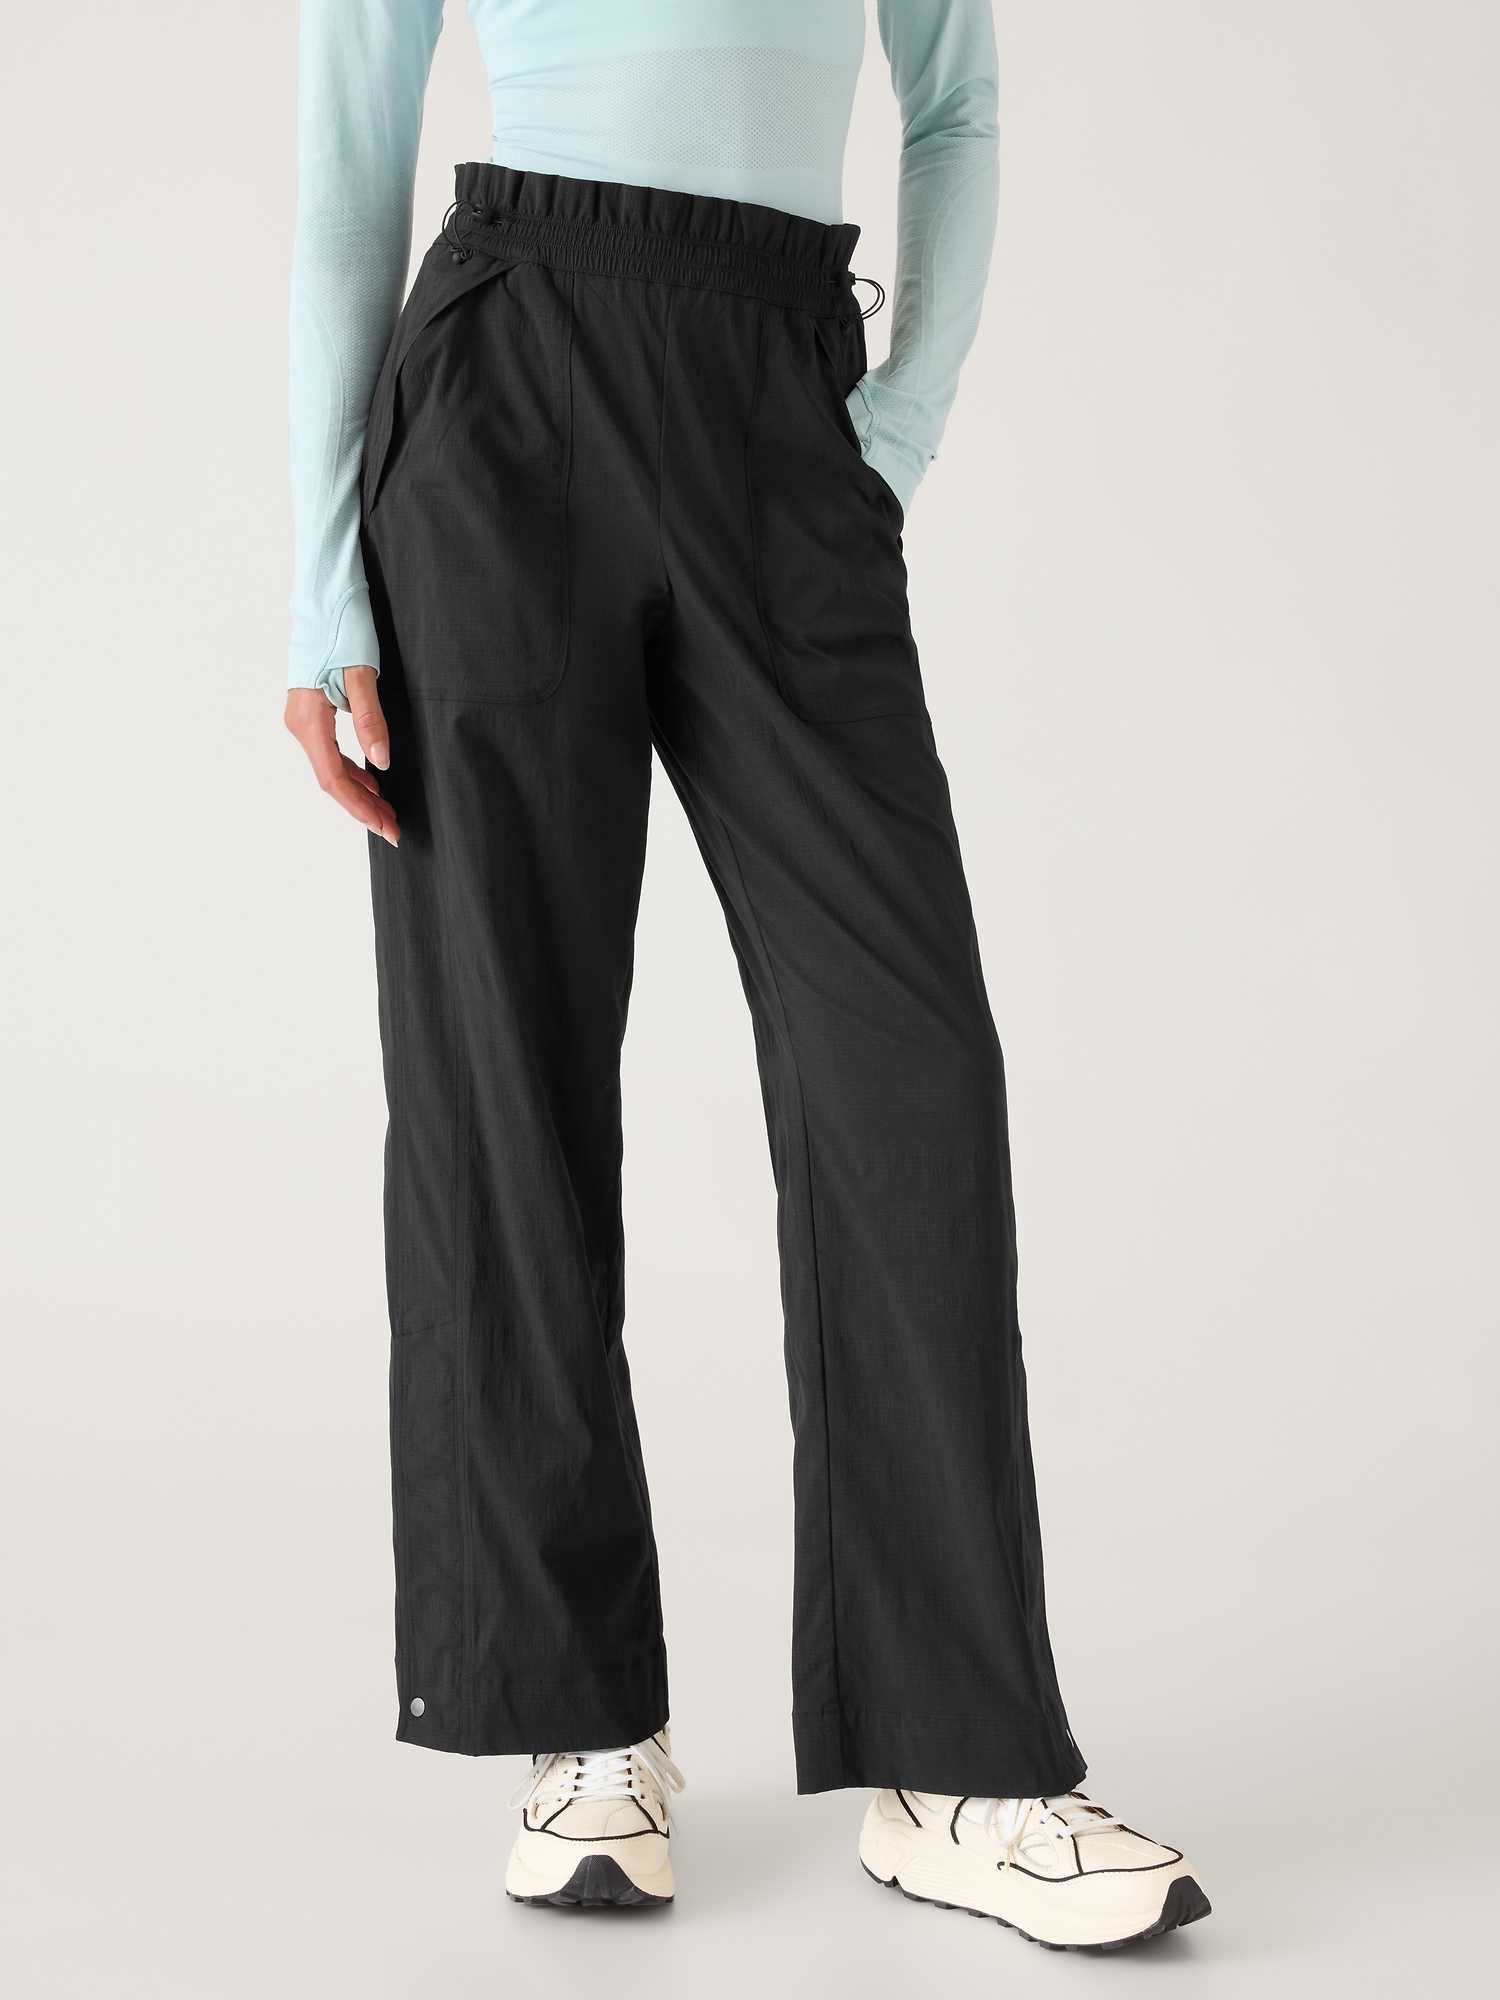 These Comfy Travel Pants Are 54% Off at Athleta